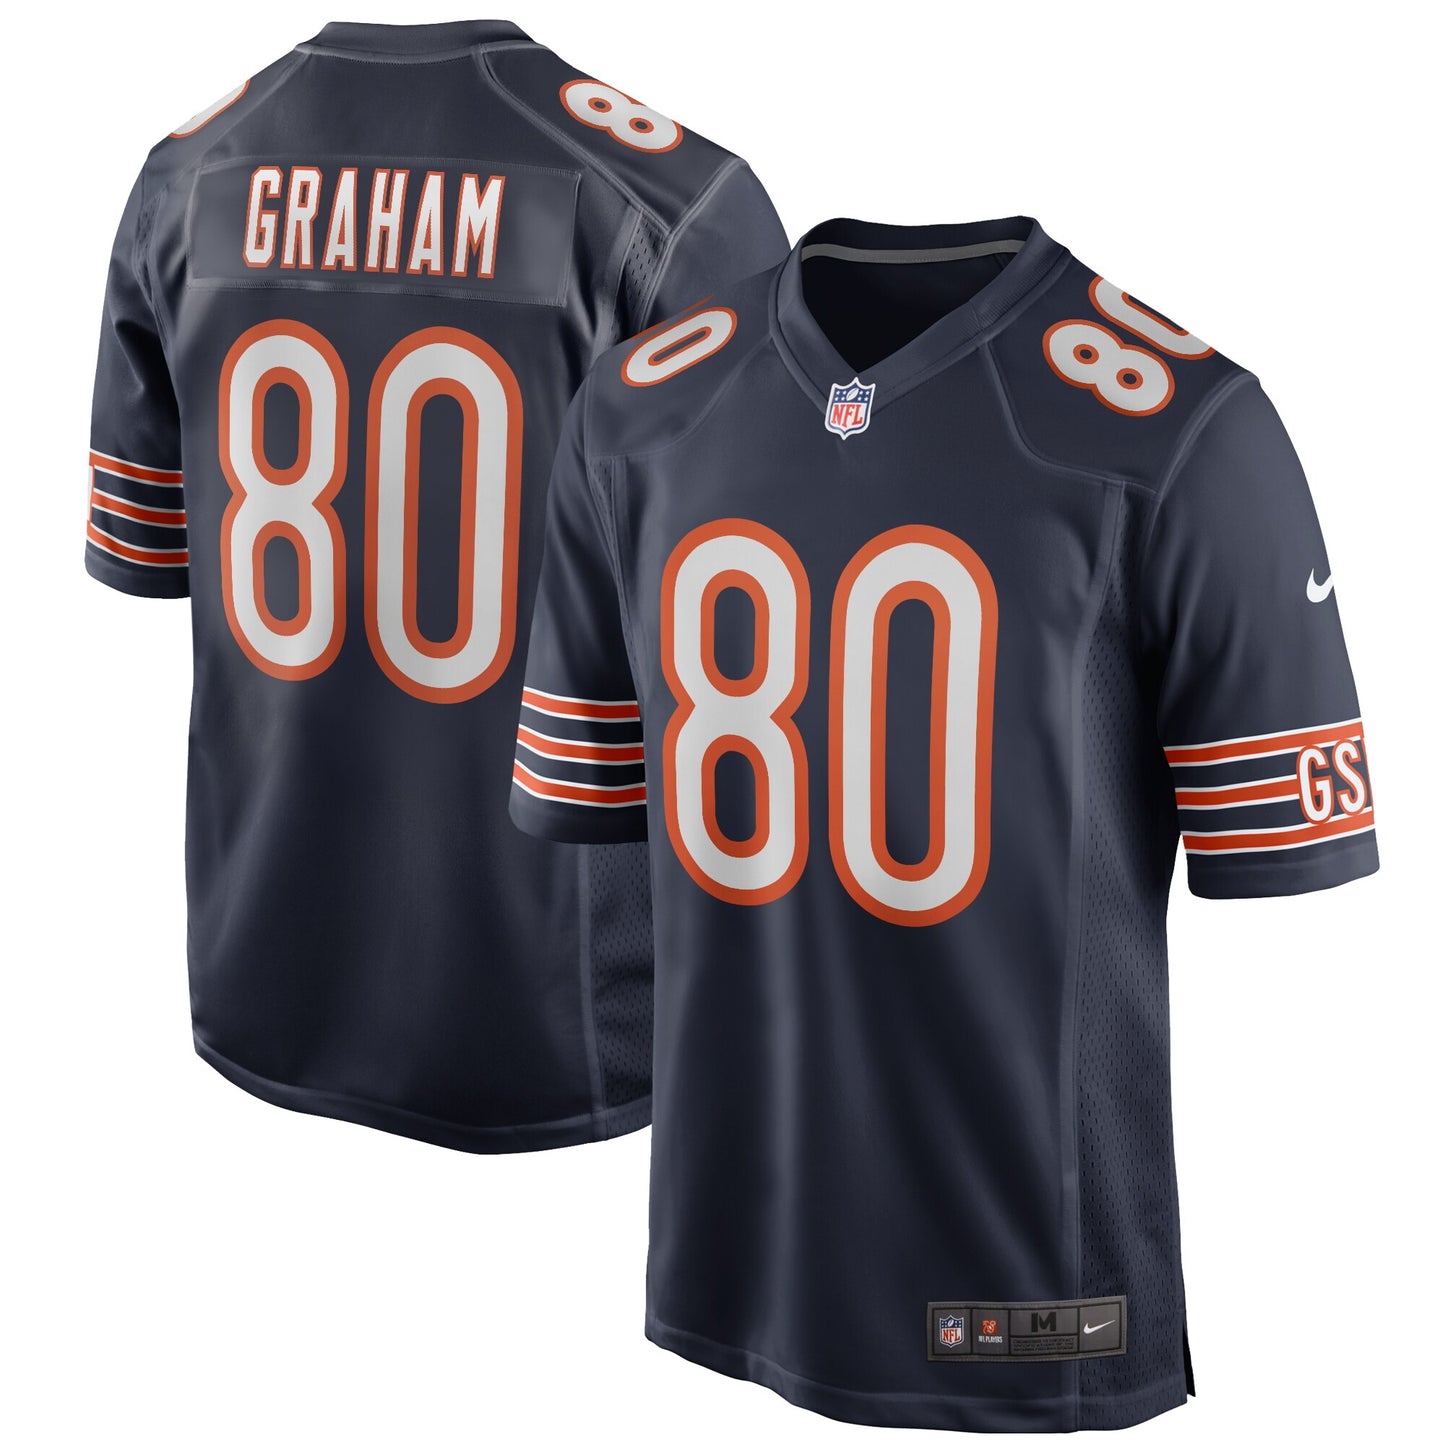 Jimmy Graham Chicago Bears Nike Game Player Jersey - Navy